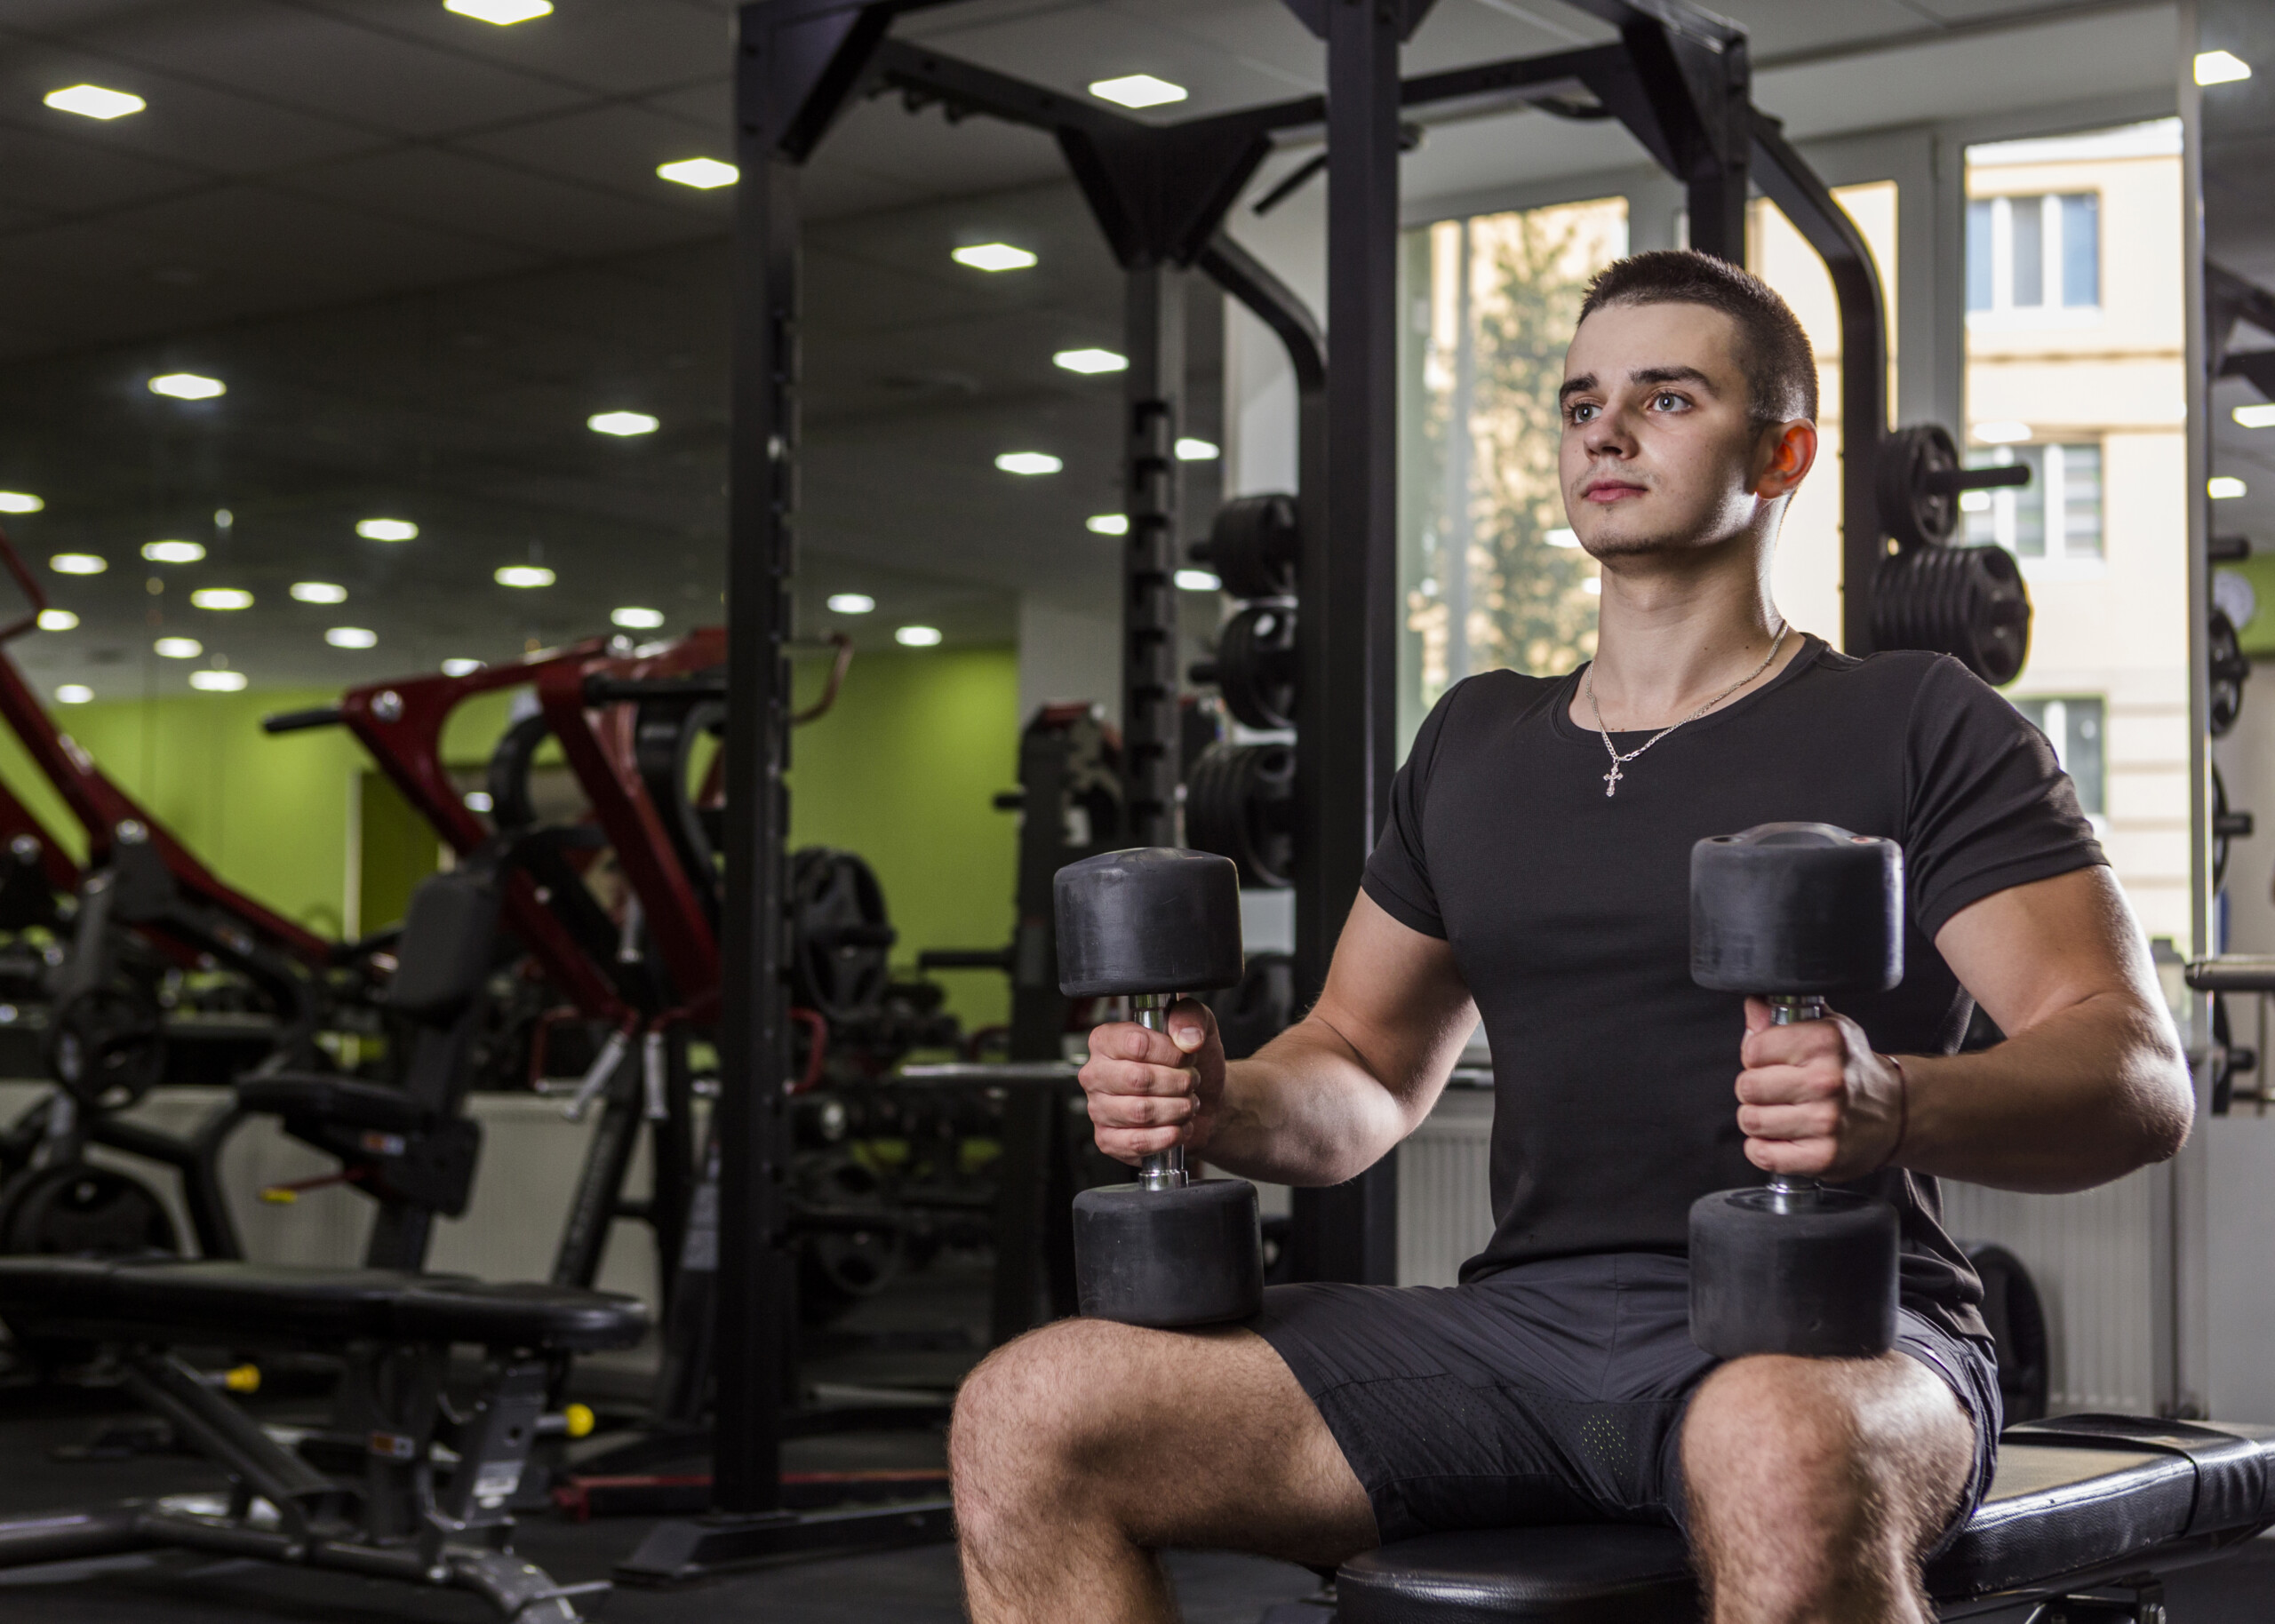 Do Intense Gym Workouts Undo the Effects of Sitting Excessively?